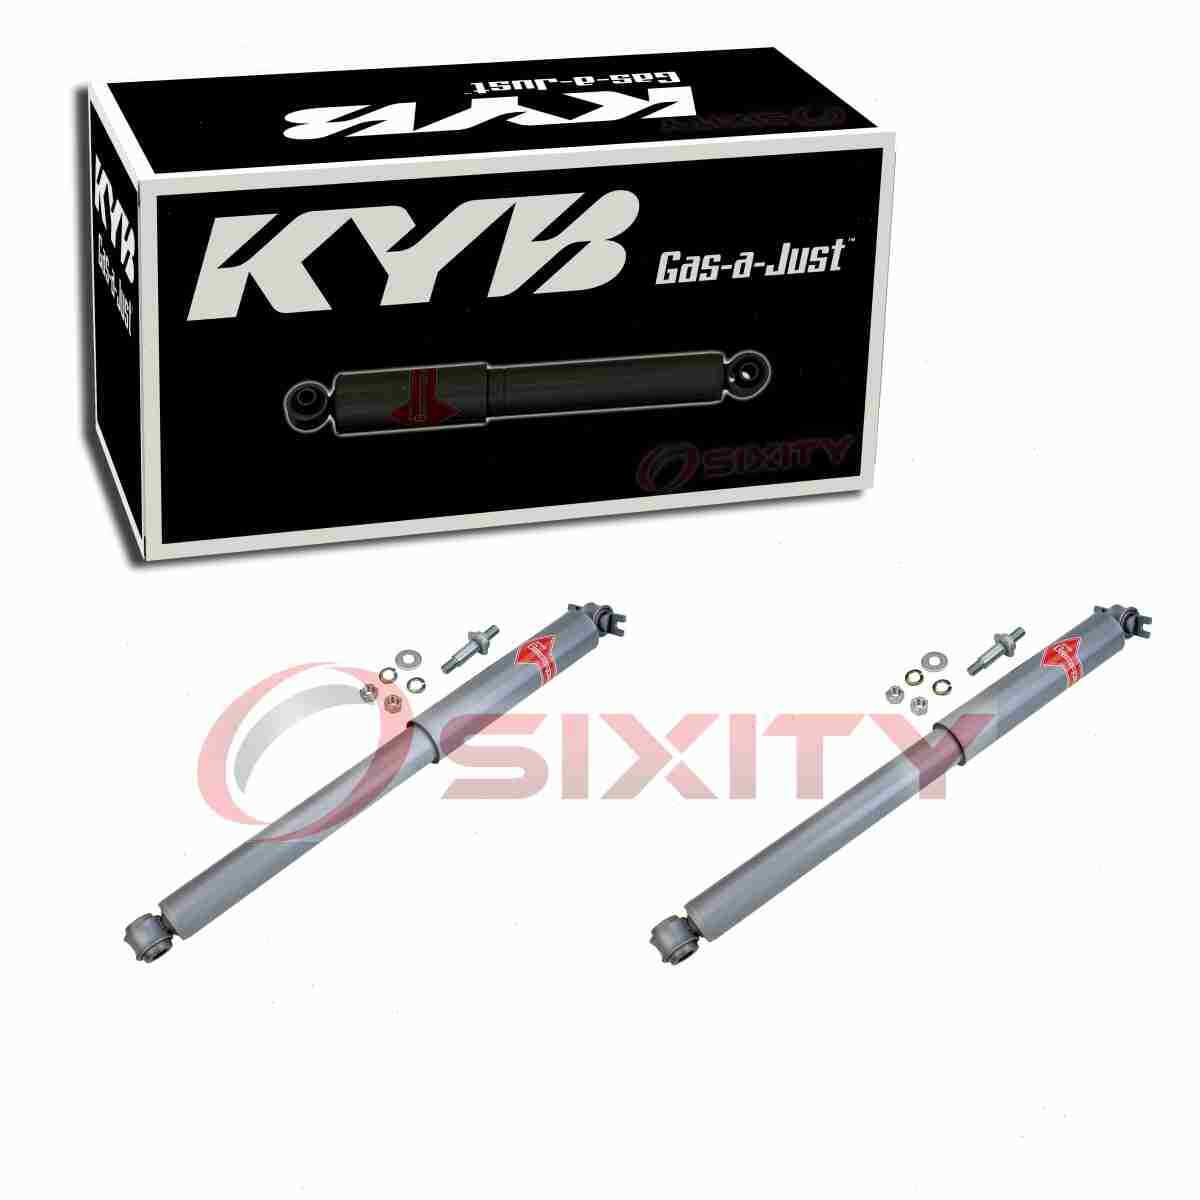 2 pc KYB Gas-a-Just Rear Shock Absorbers for 1978-1987 Oldsmobile Cutlass ne